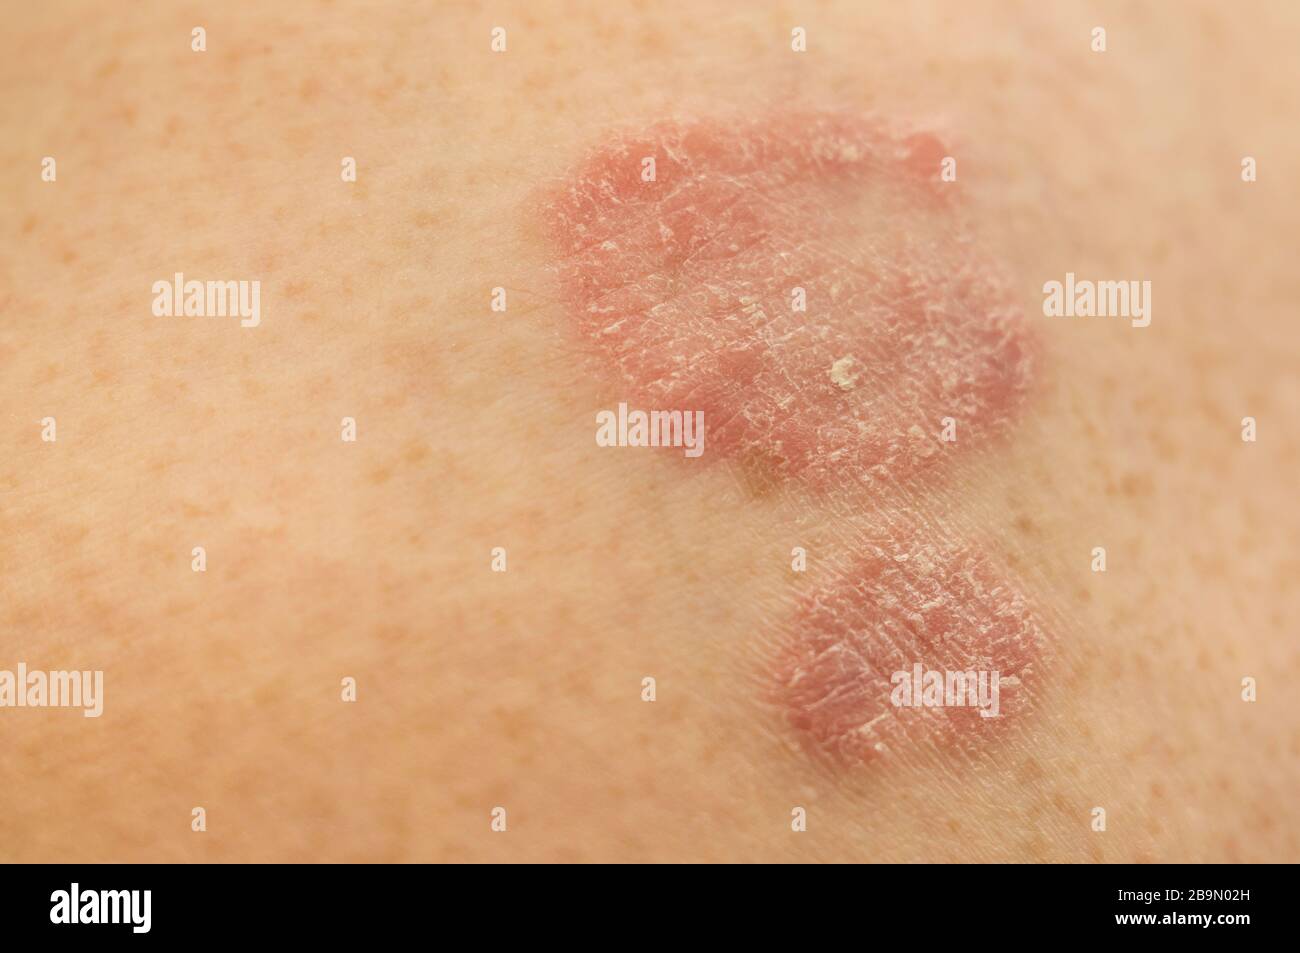 Psoriasis skin. Two psoriatic plaques on light skin. Psoriasis is an incurable autoimmune human disease.Soft focus. Stock Photo